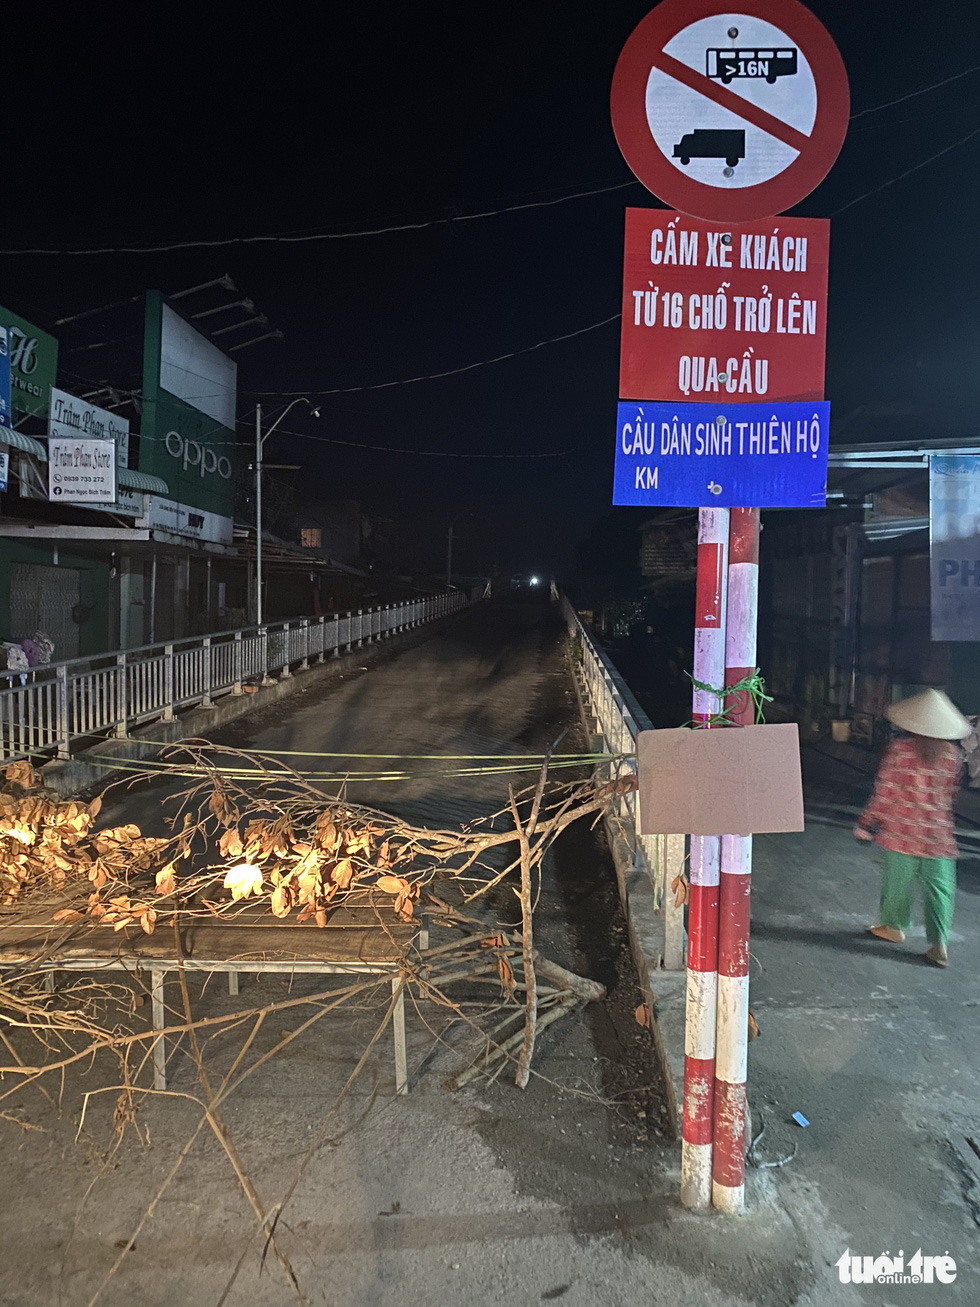 A traffic sign banning truck and passenger bus with over 16 seats is seen at the beginning of Thien Ho Bridge in Cai Be District, Tien Giang Province, November 30, 2020. Photo: Hoai Thuong / Tuoi Tre